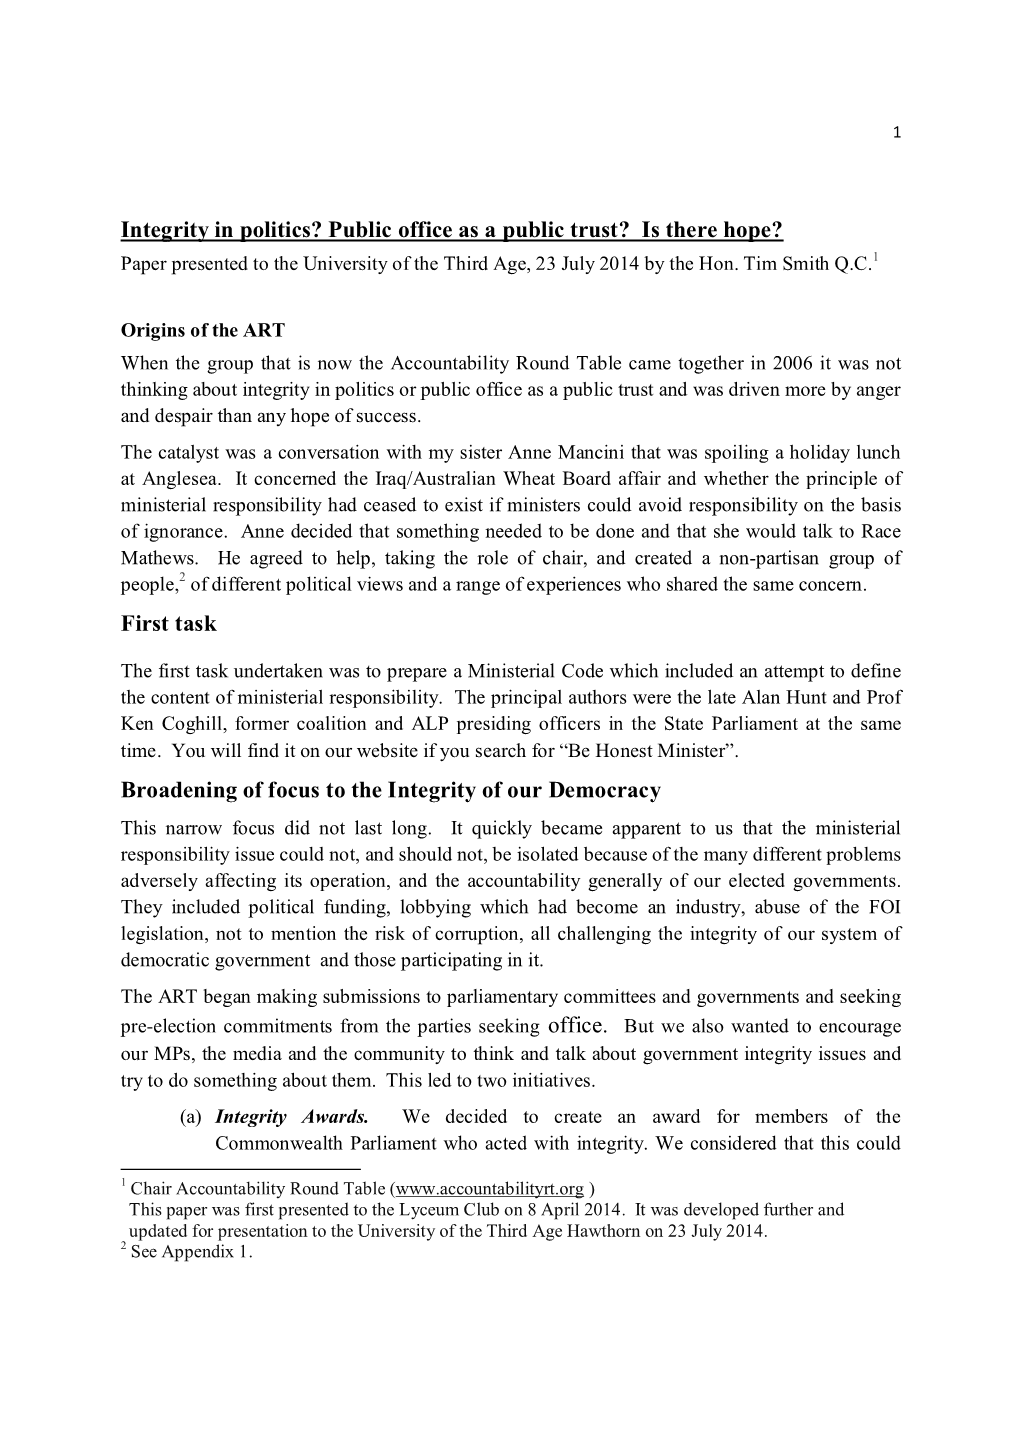 Integrity in Politics? Public Office As a Public Trust? Is There Hope? Paper Presented to the University of the Third Age, 23 July 2014 by the Hon